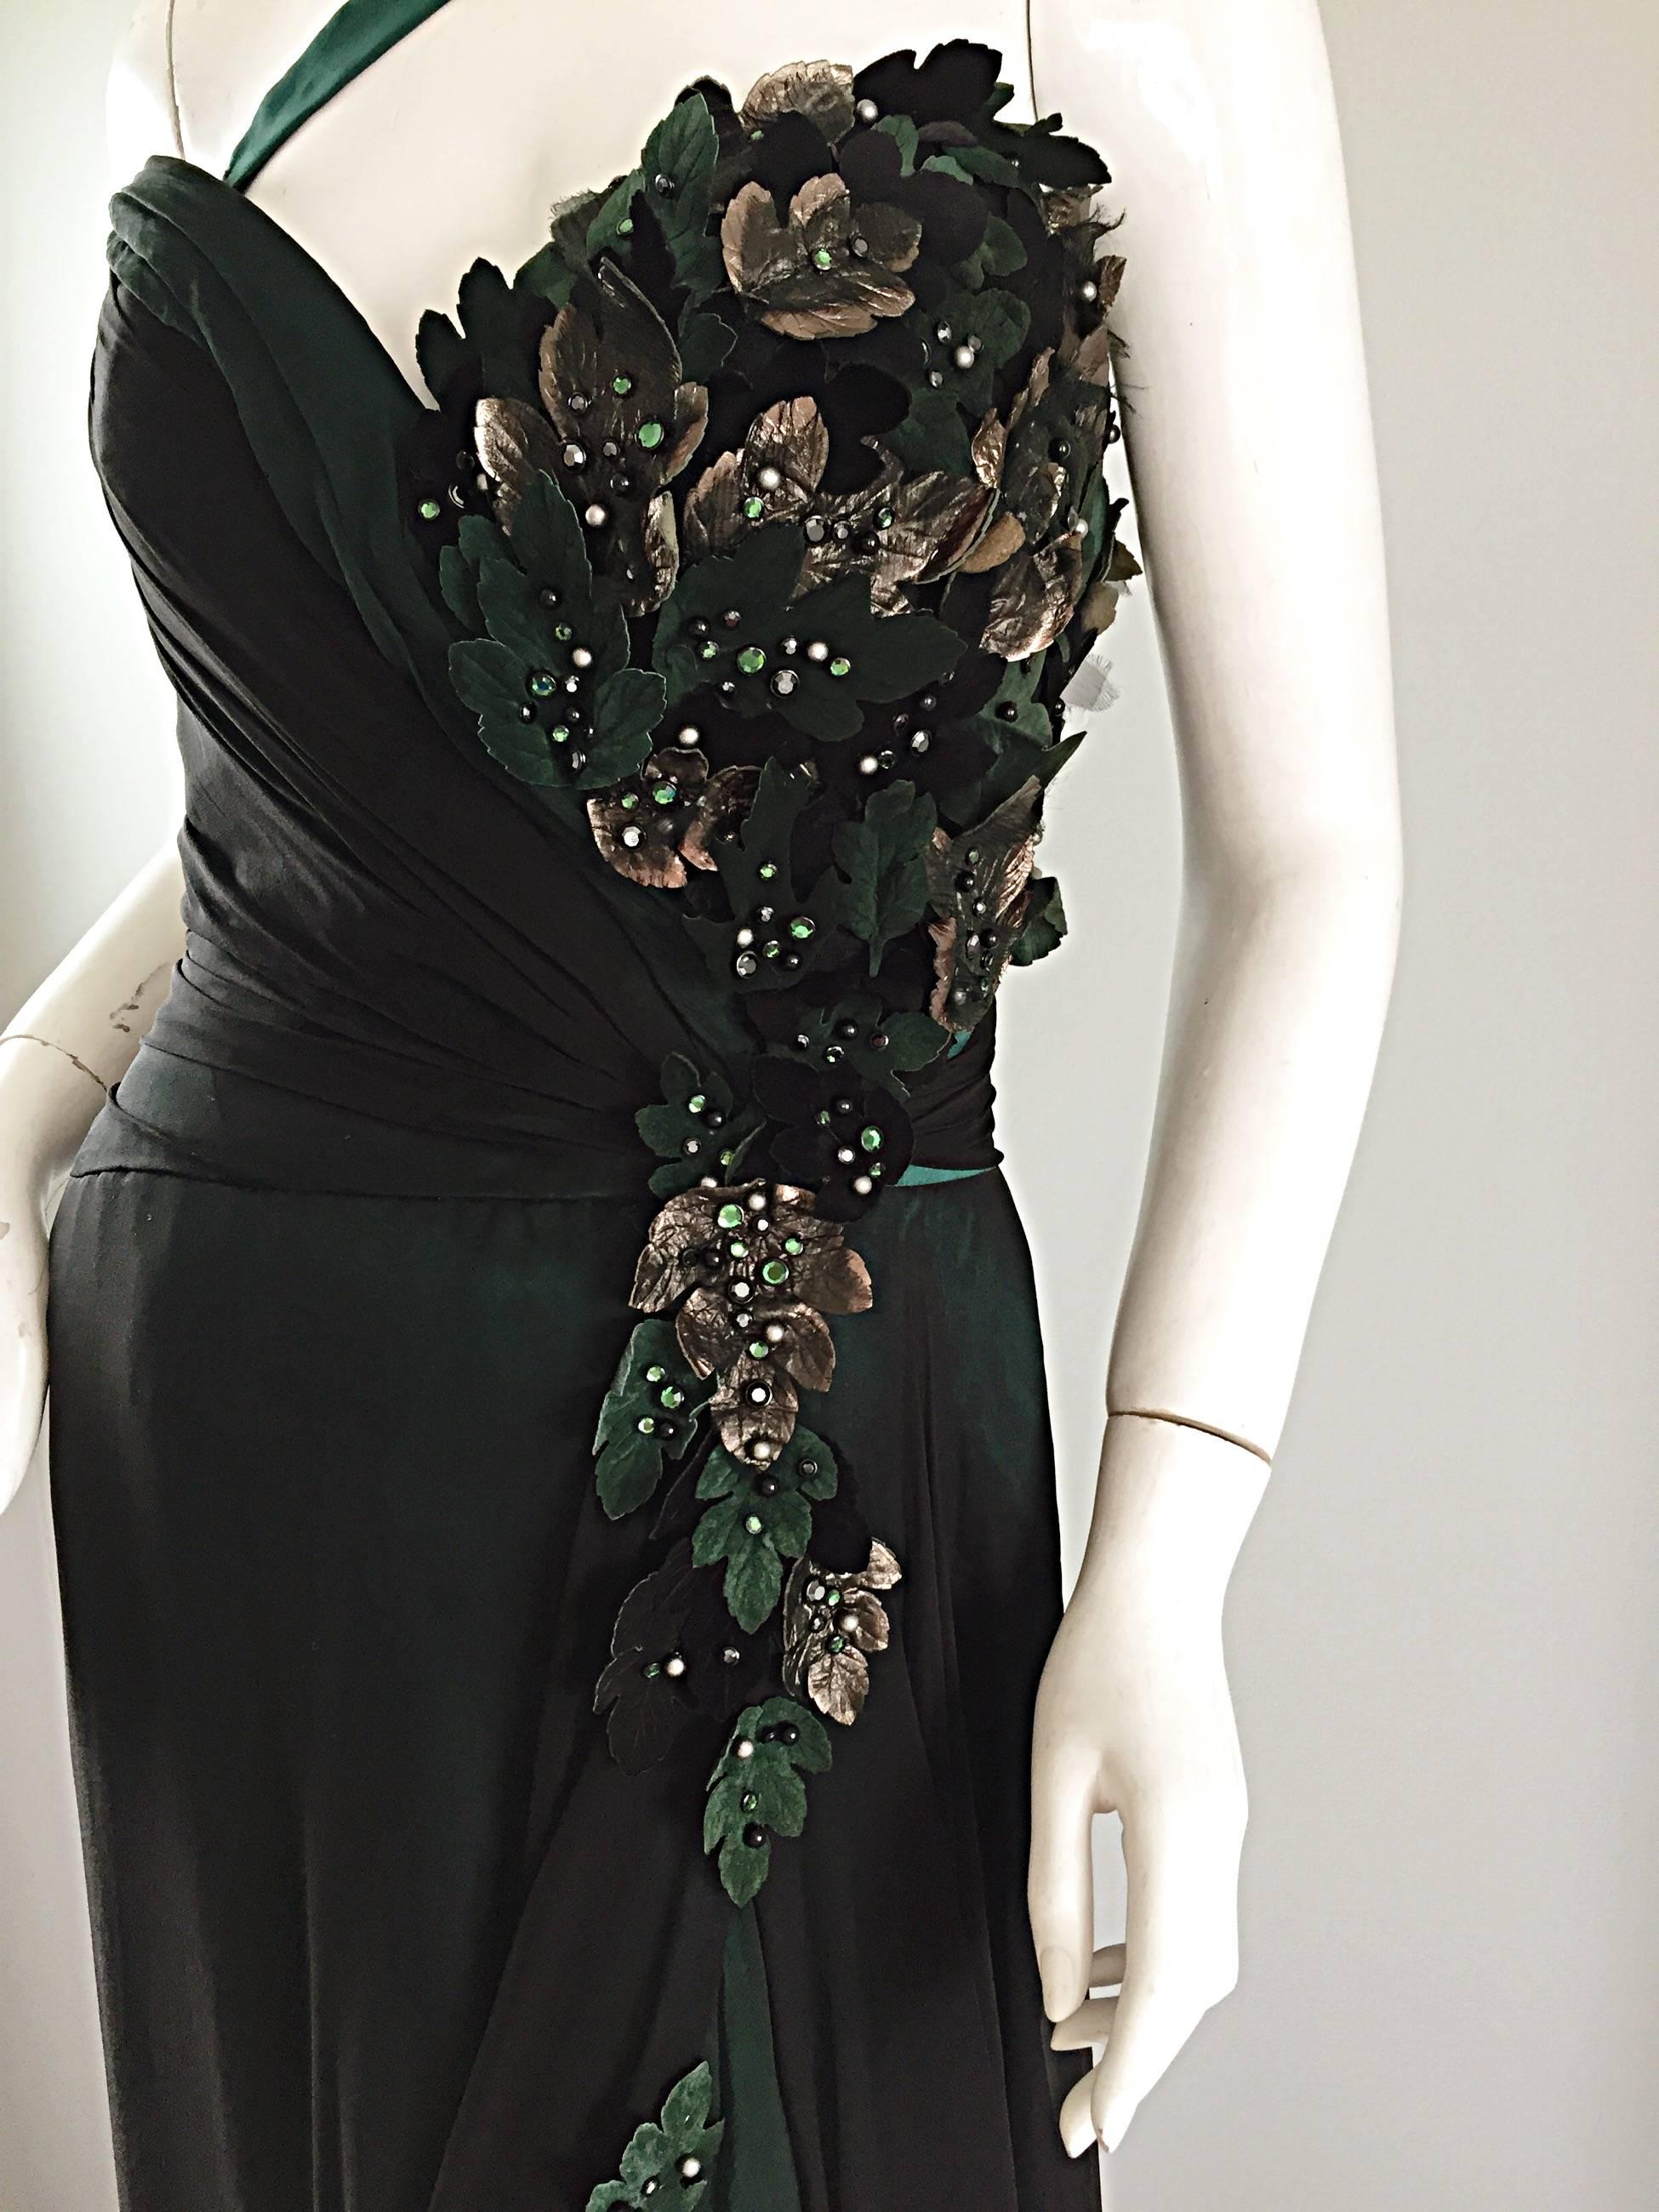 Quite possibly my favorite BOB MACKIE Couture dress EVER! I cannot even begin to describe this beauty! Beautiful emerald green silk with black silk chiffon overlay. Features a convertible strap that can be worn over one shoulder, or tucked in for a